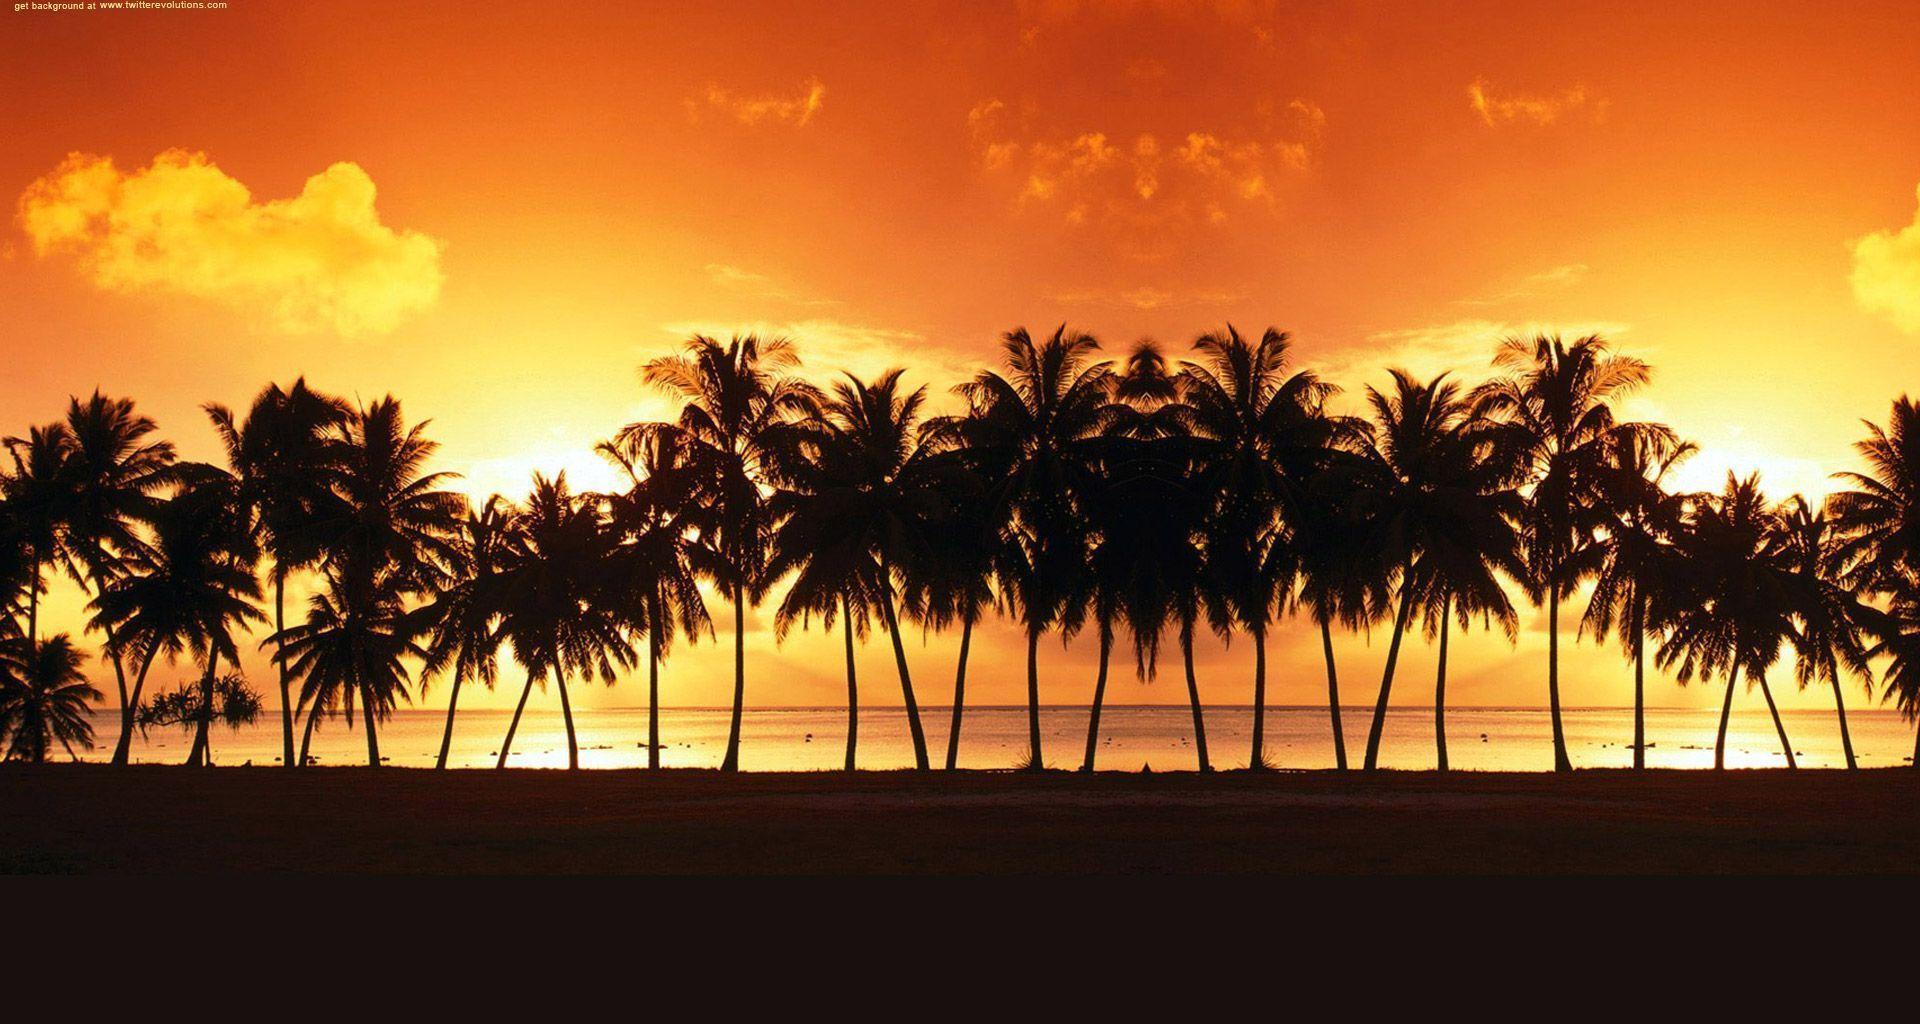 Palm trees sunset Twitter background. Twitter background